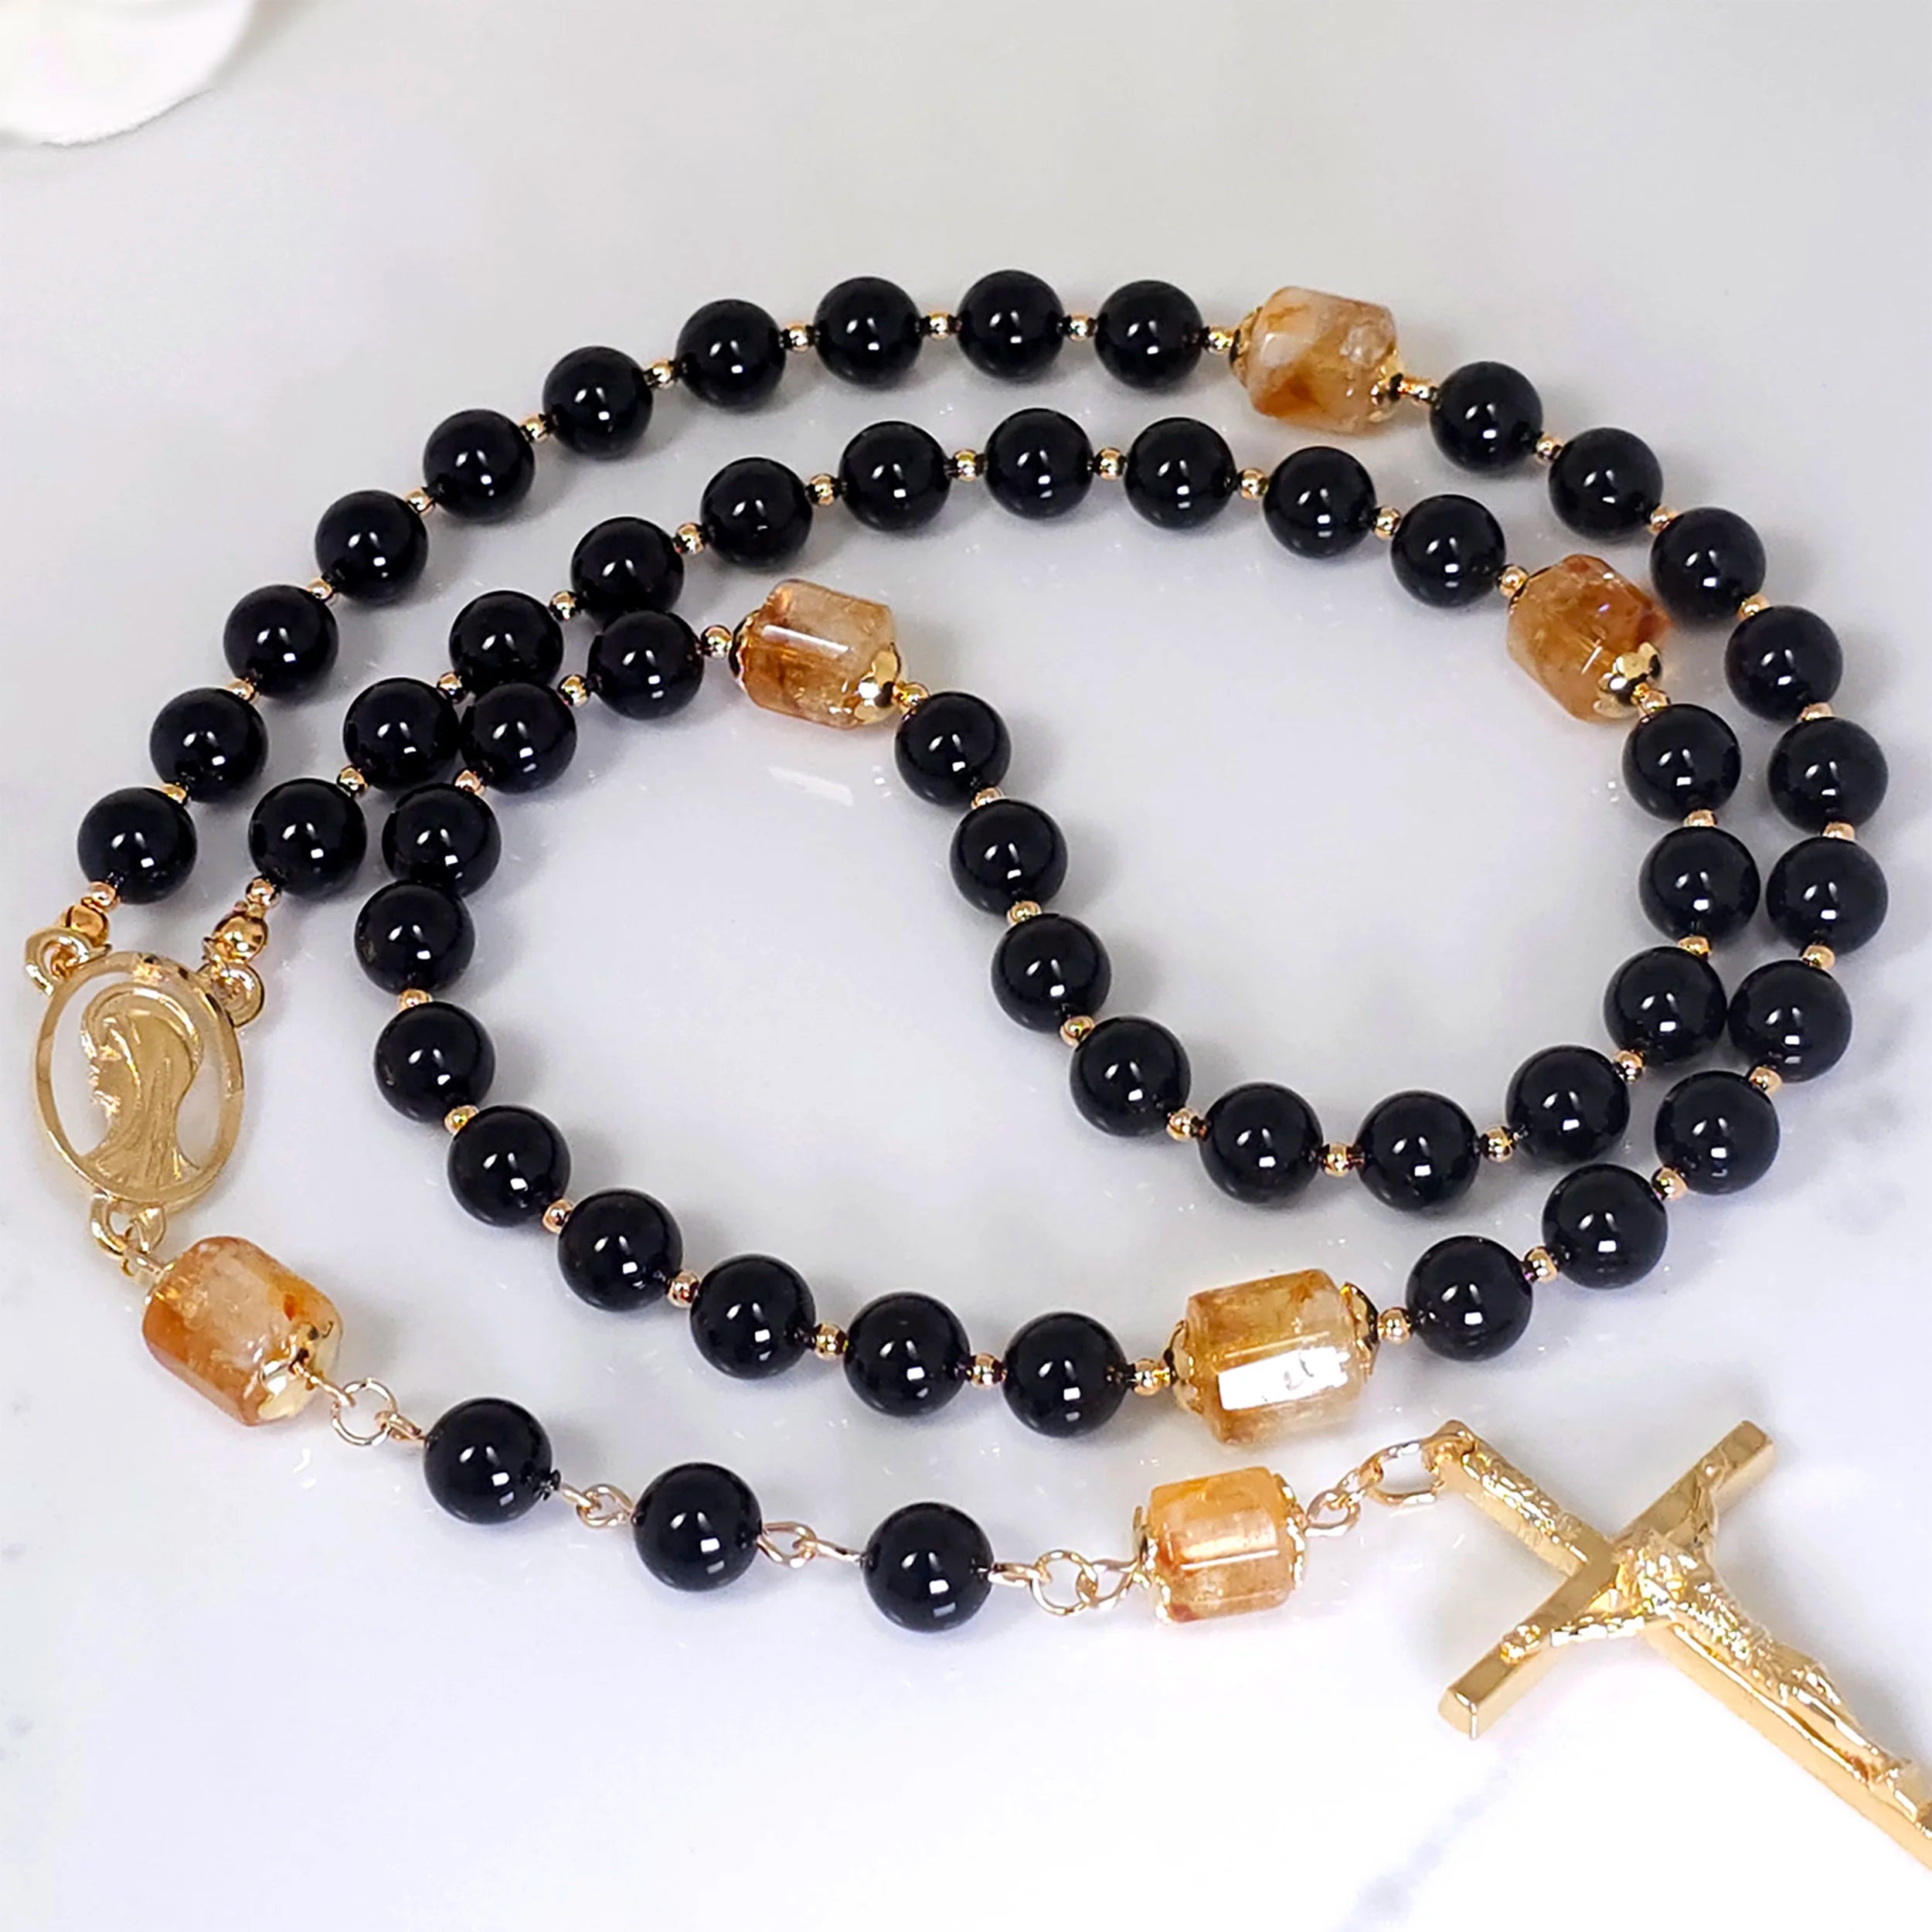 Black rosary laying on the table.